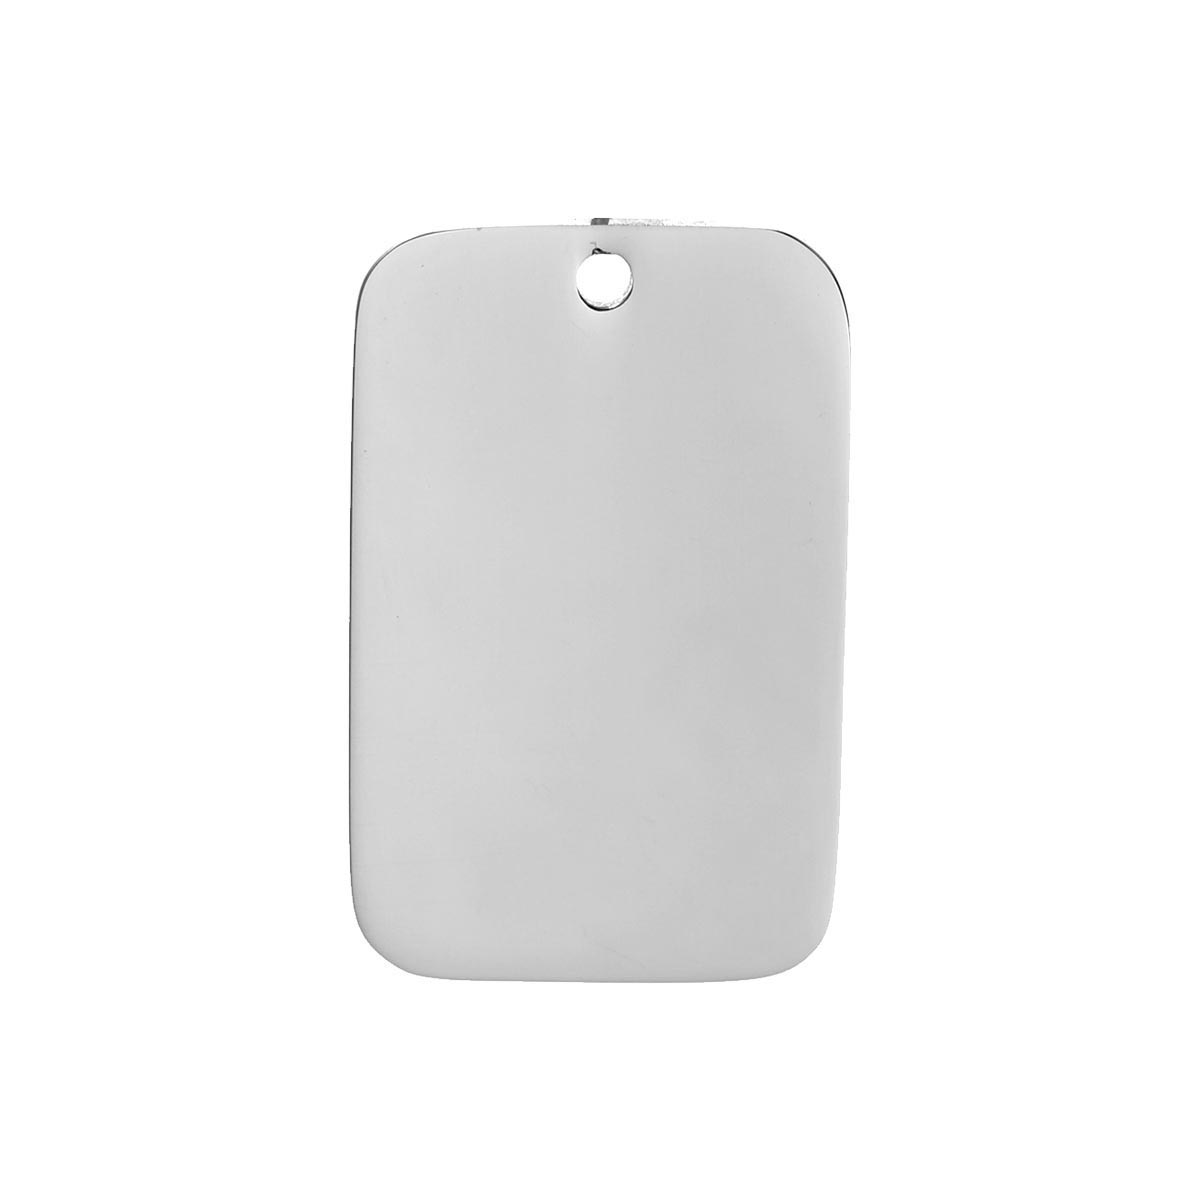 Picture of 304 Stainless Steel Blank Stamping Tags Pendants Rectangle Silver Tone One-sided Polishing 31mm x 20mm, 1 Piece